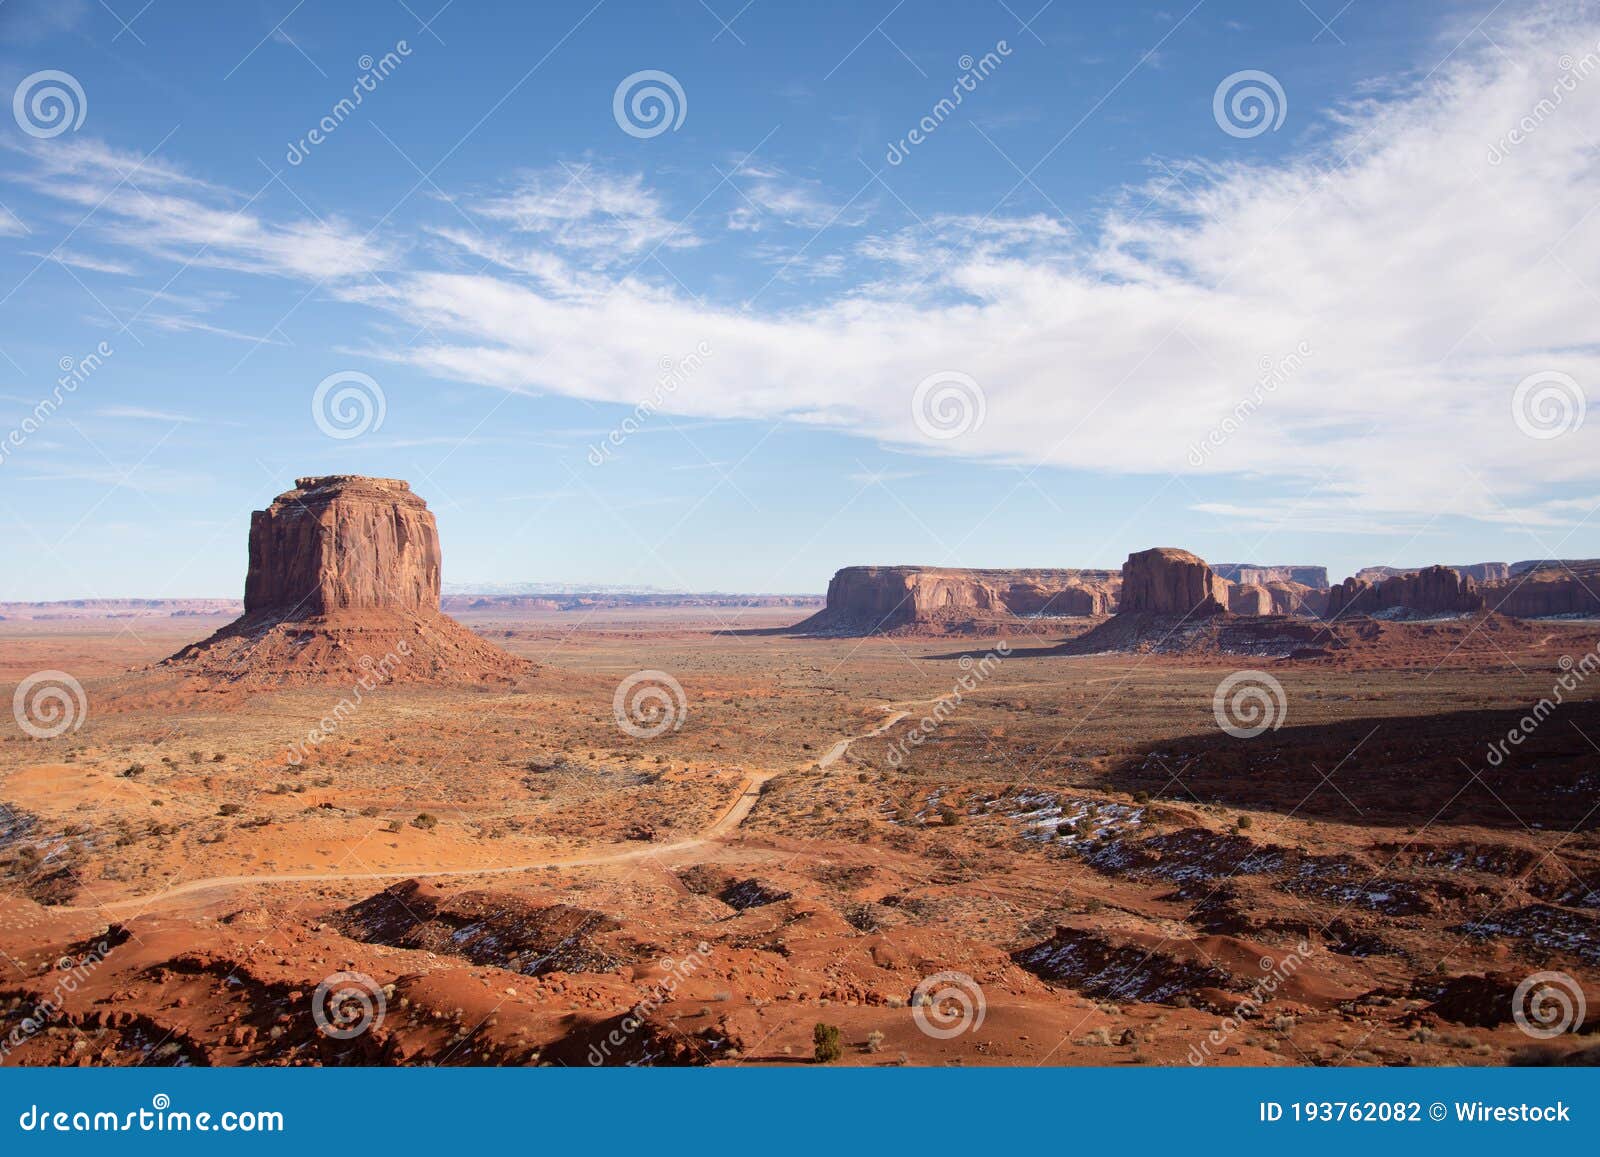 landscape view of the rock formations in oljato-monument valley in arizona, the usa